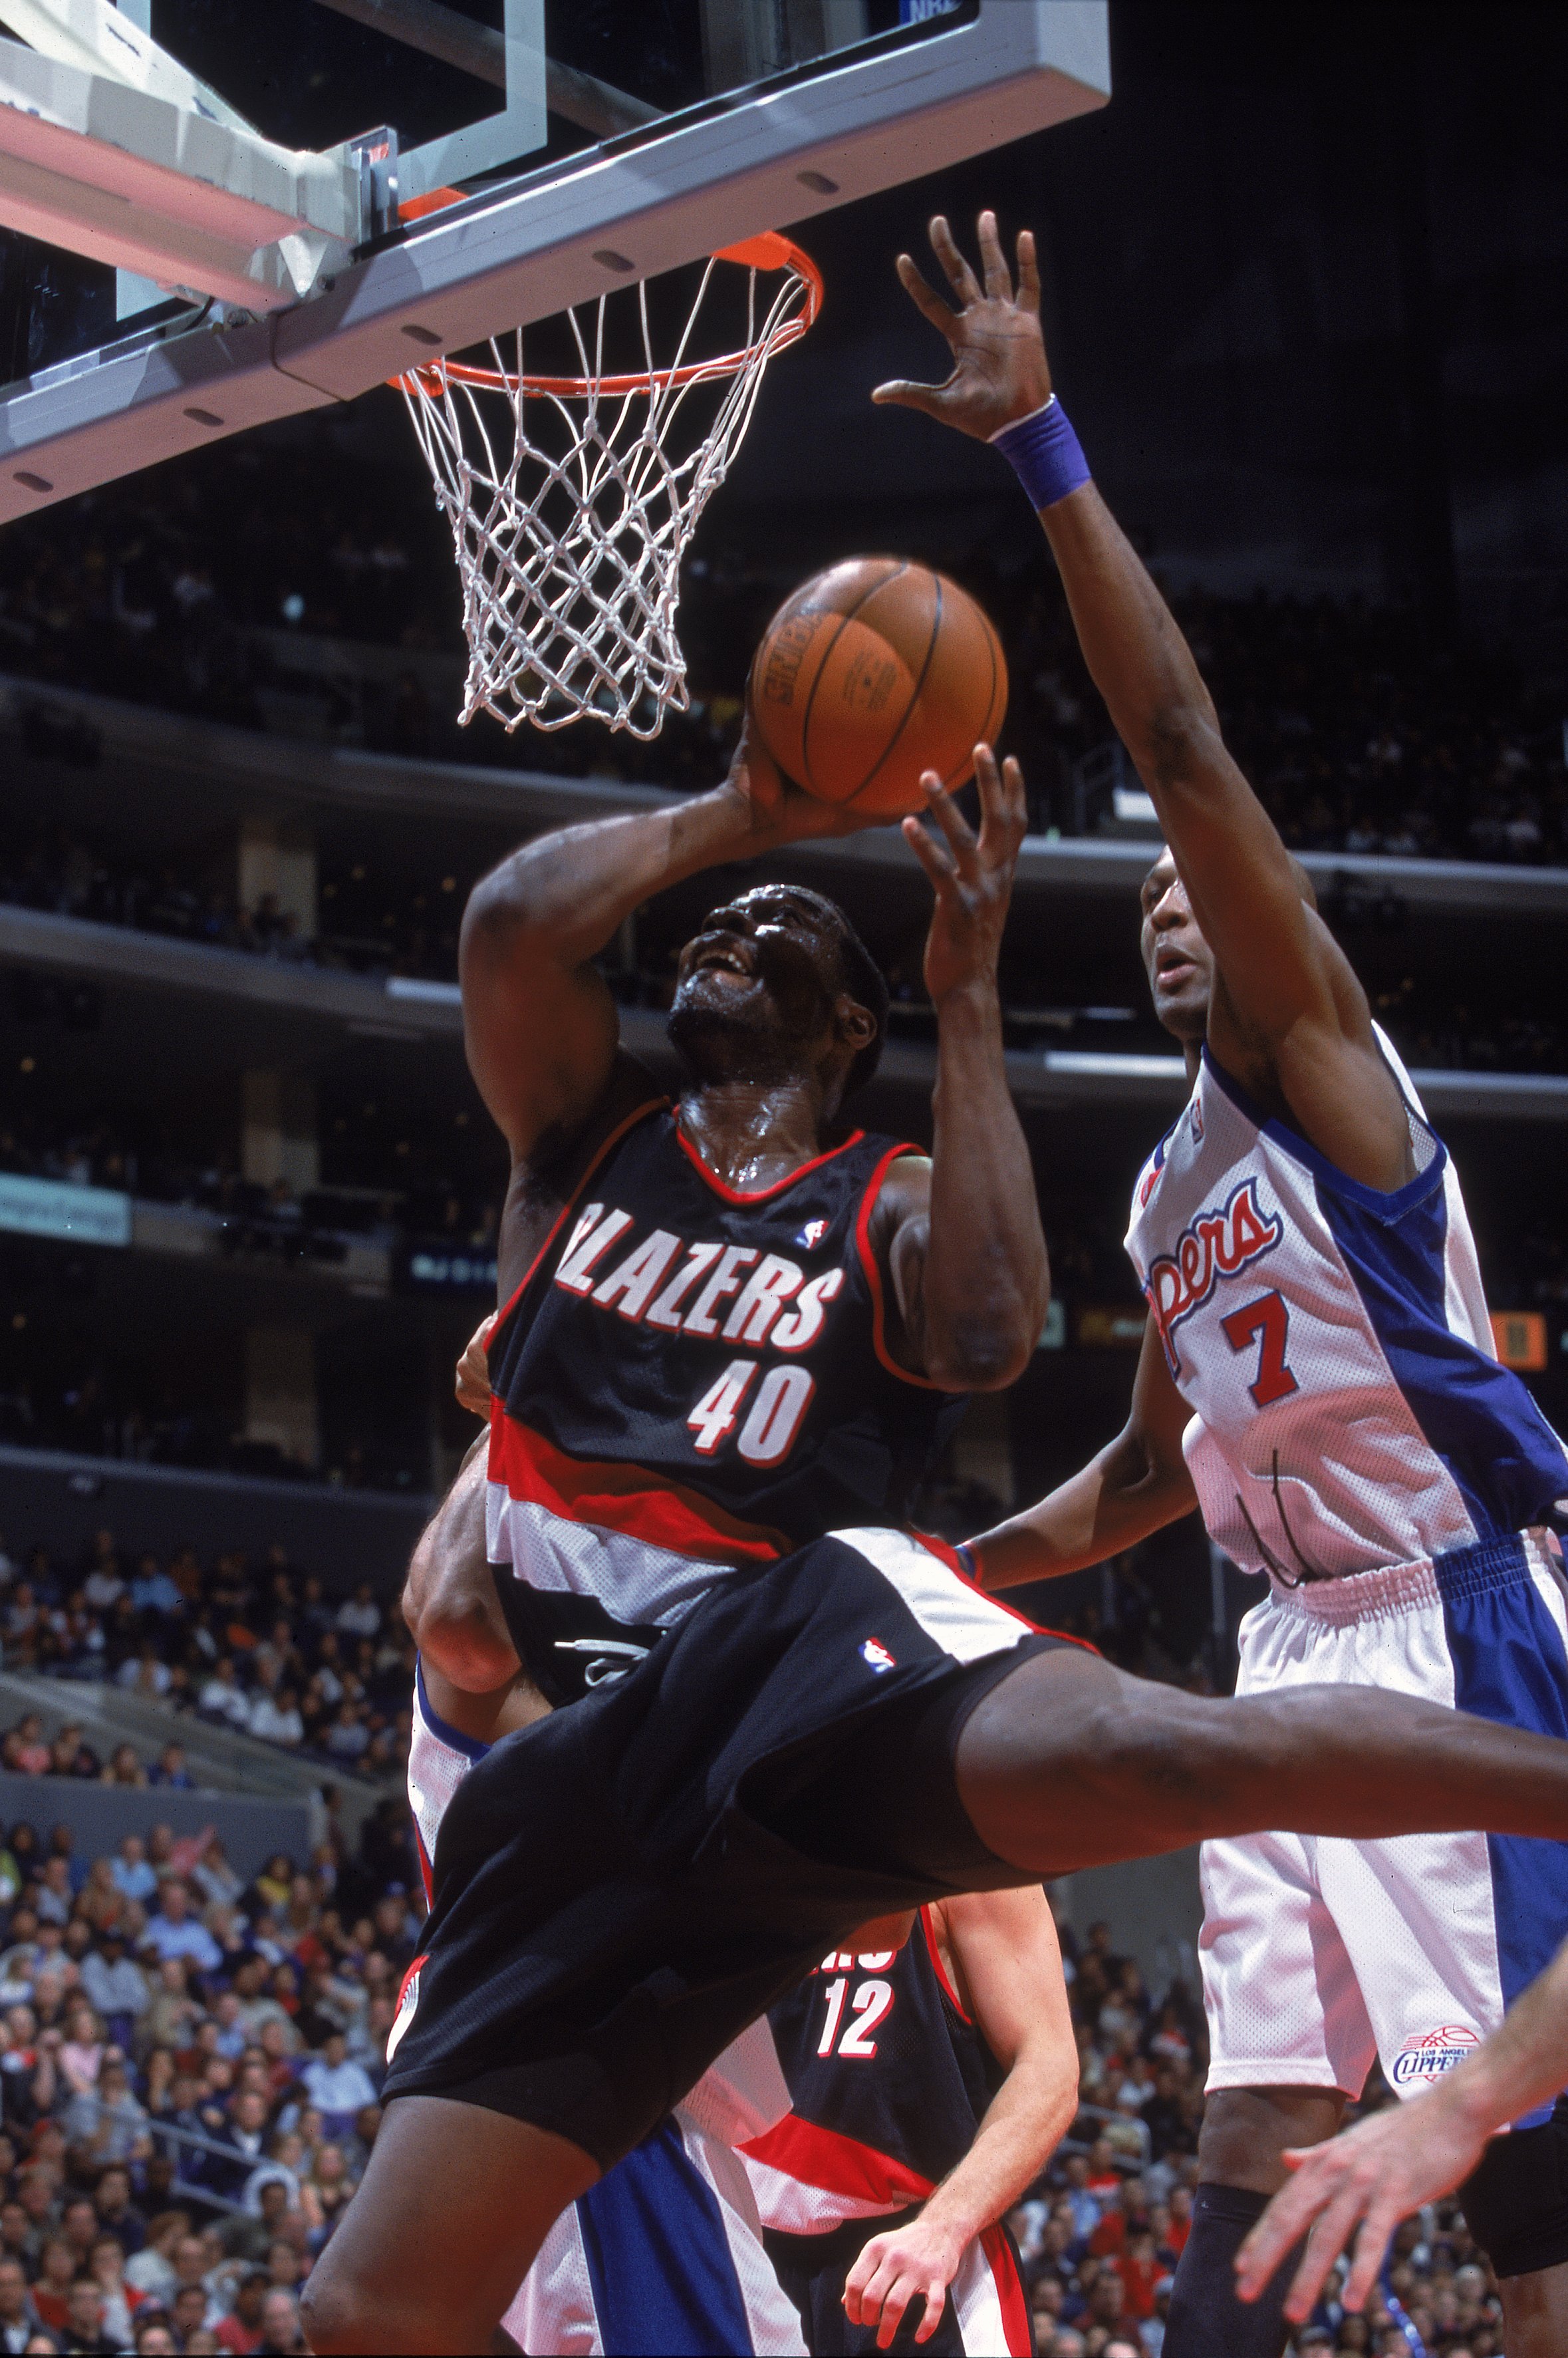 3 Feb 2001:  Shawn Kemp #40 of the Portland Trail Blazers takes a shot against Lamar Odom #7 of the Los Angeles Clippers during the game at the STAPLES Center in Los Angeles, California. The Clippers defeated the Trail Blazers 90-89.  NOTE TO USER: It is